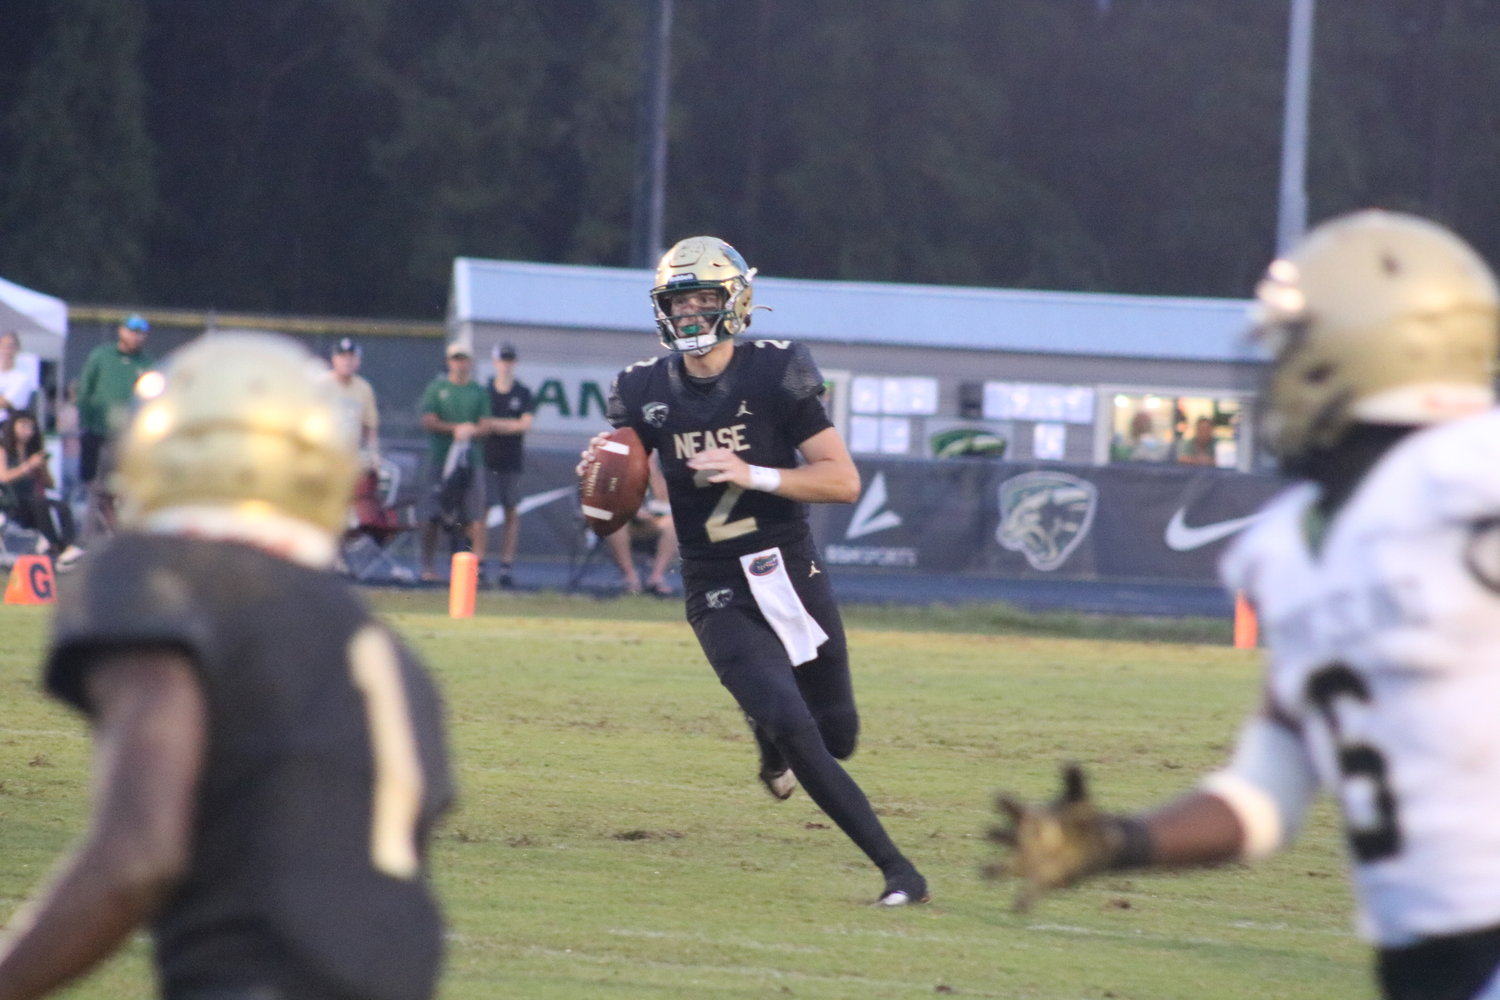 Nease quarterback Marcus Stokes rolls out and looks downfield against Fleming Island.